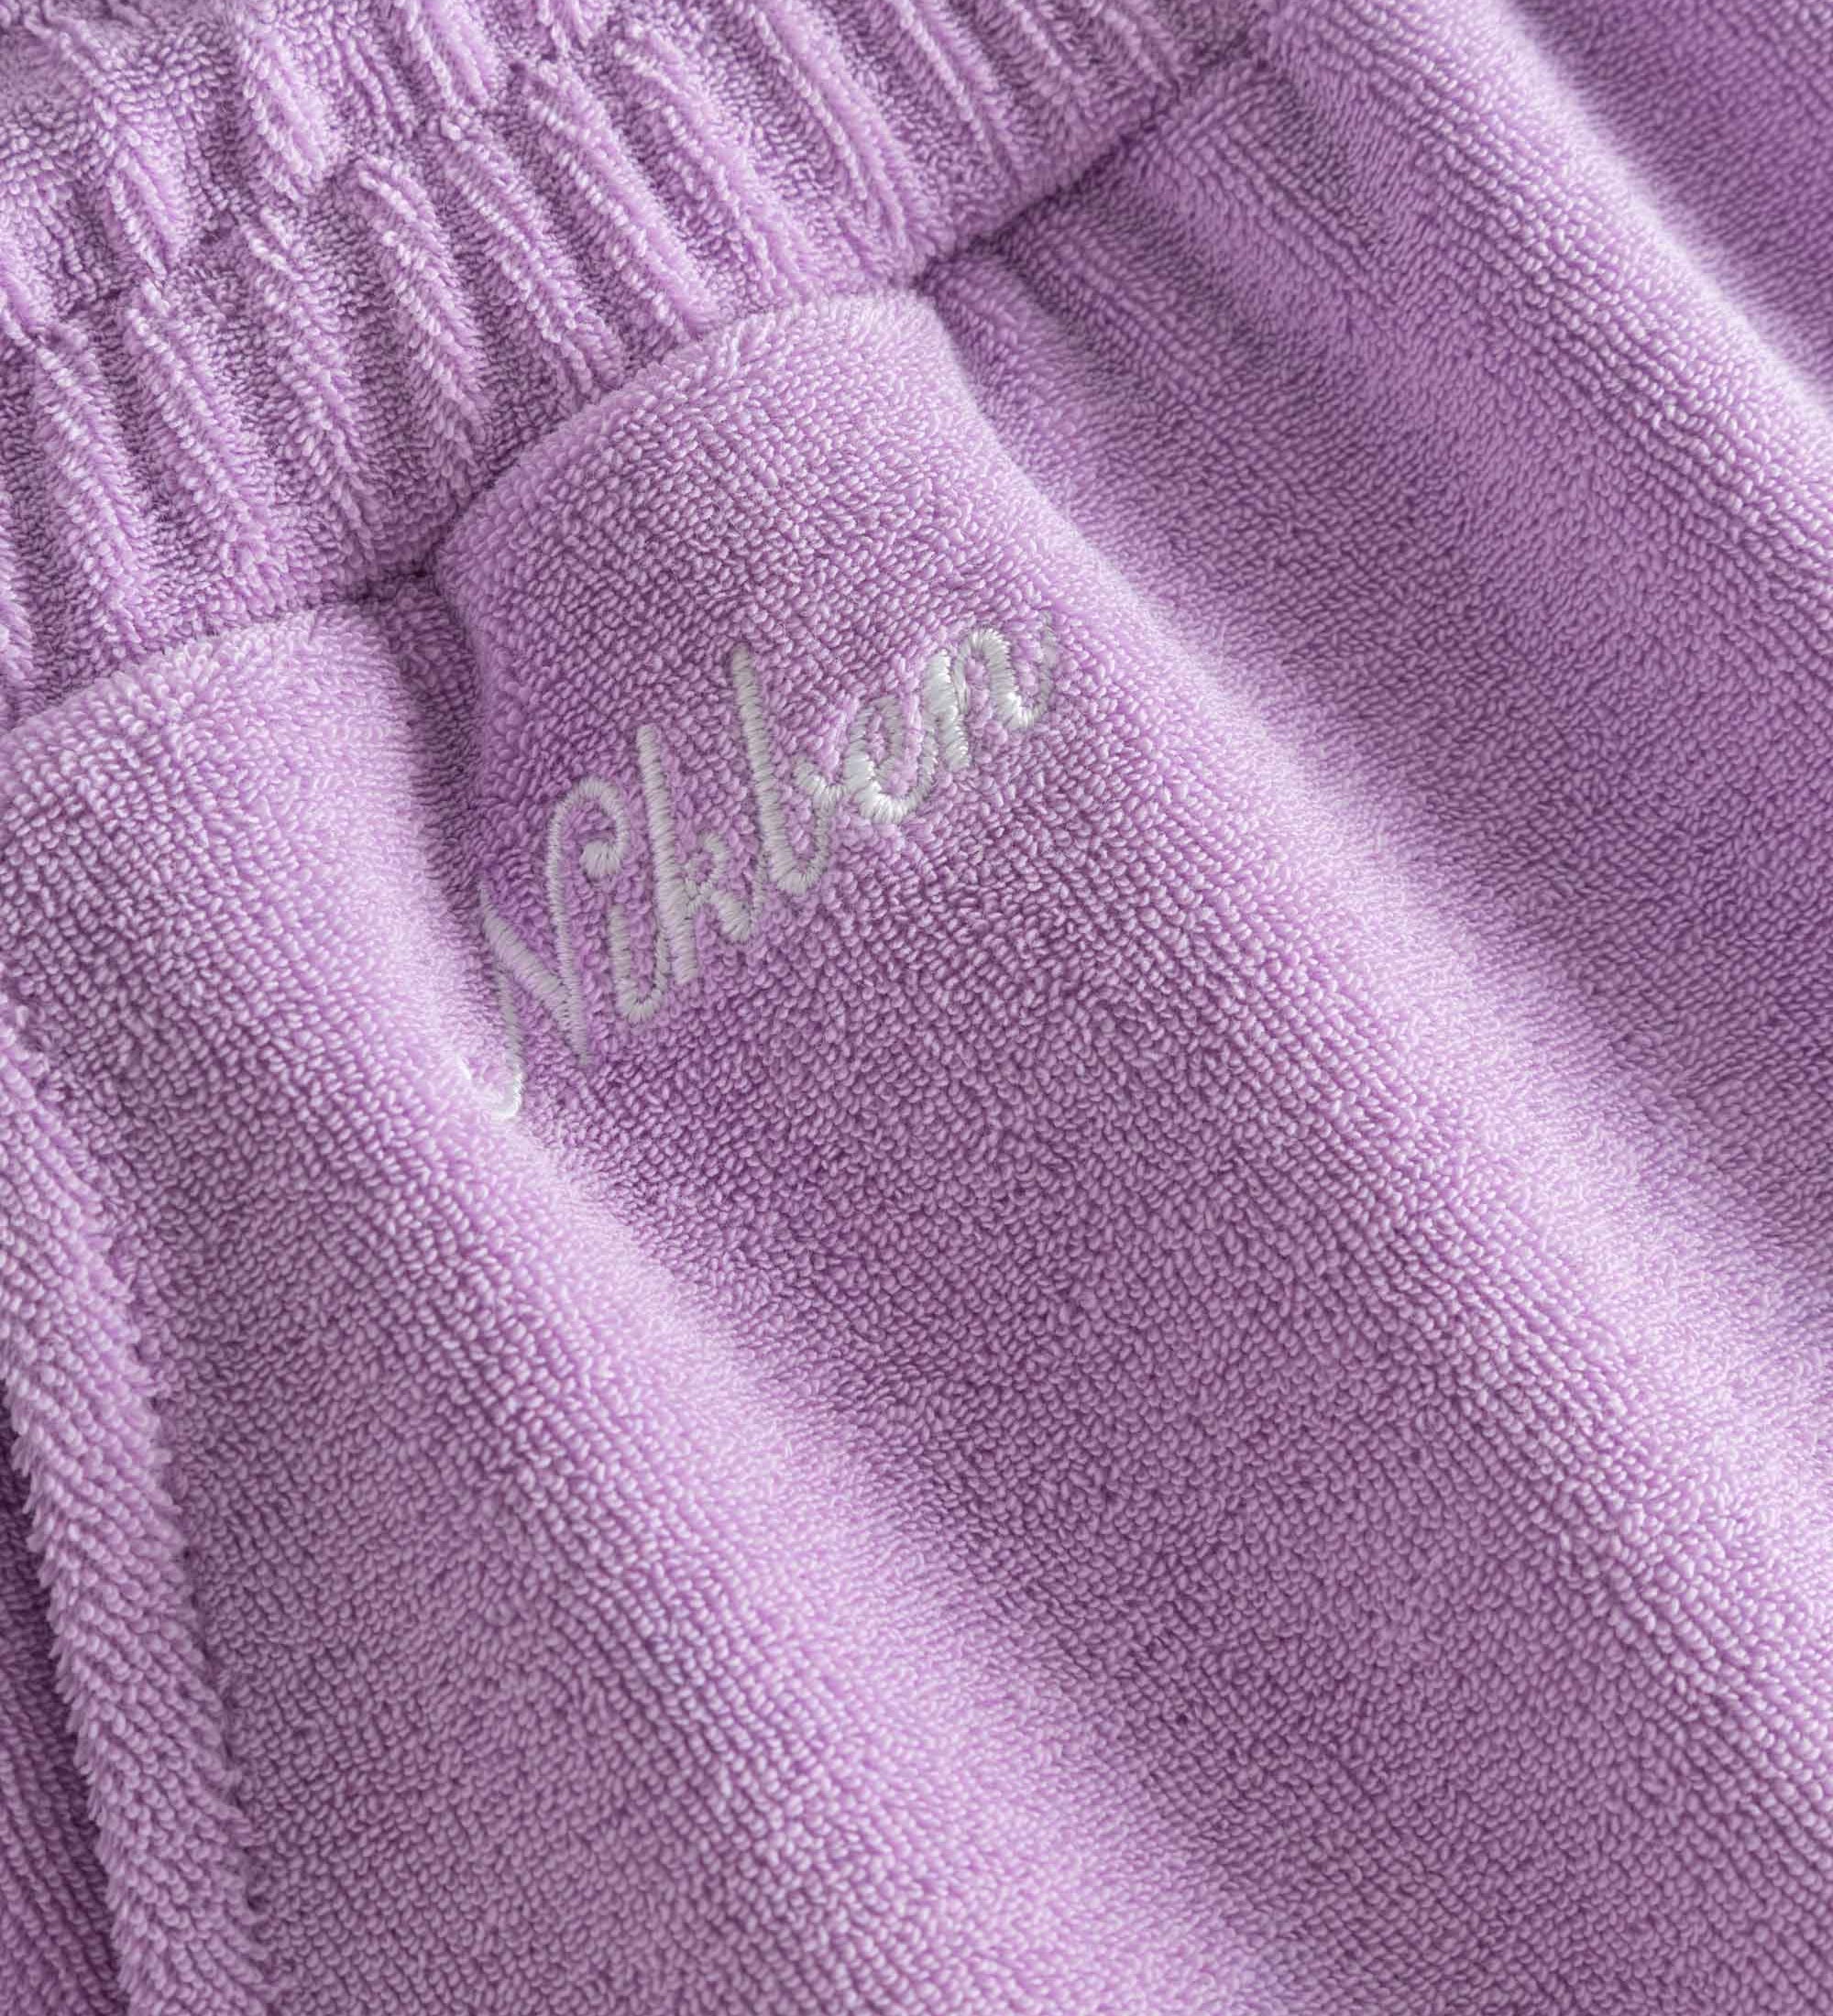 Close up of embroidered logo on purple low cut shorts in terry toweling fabric